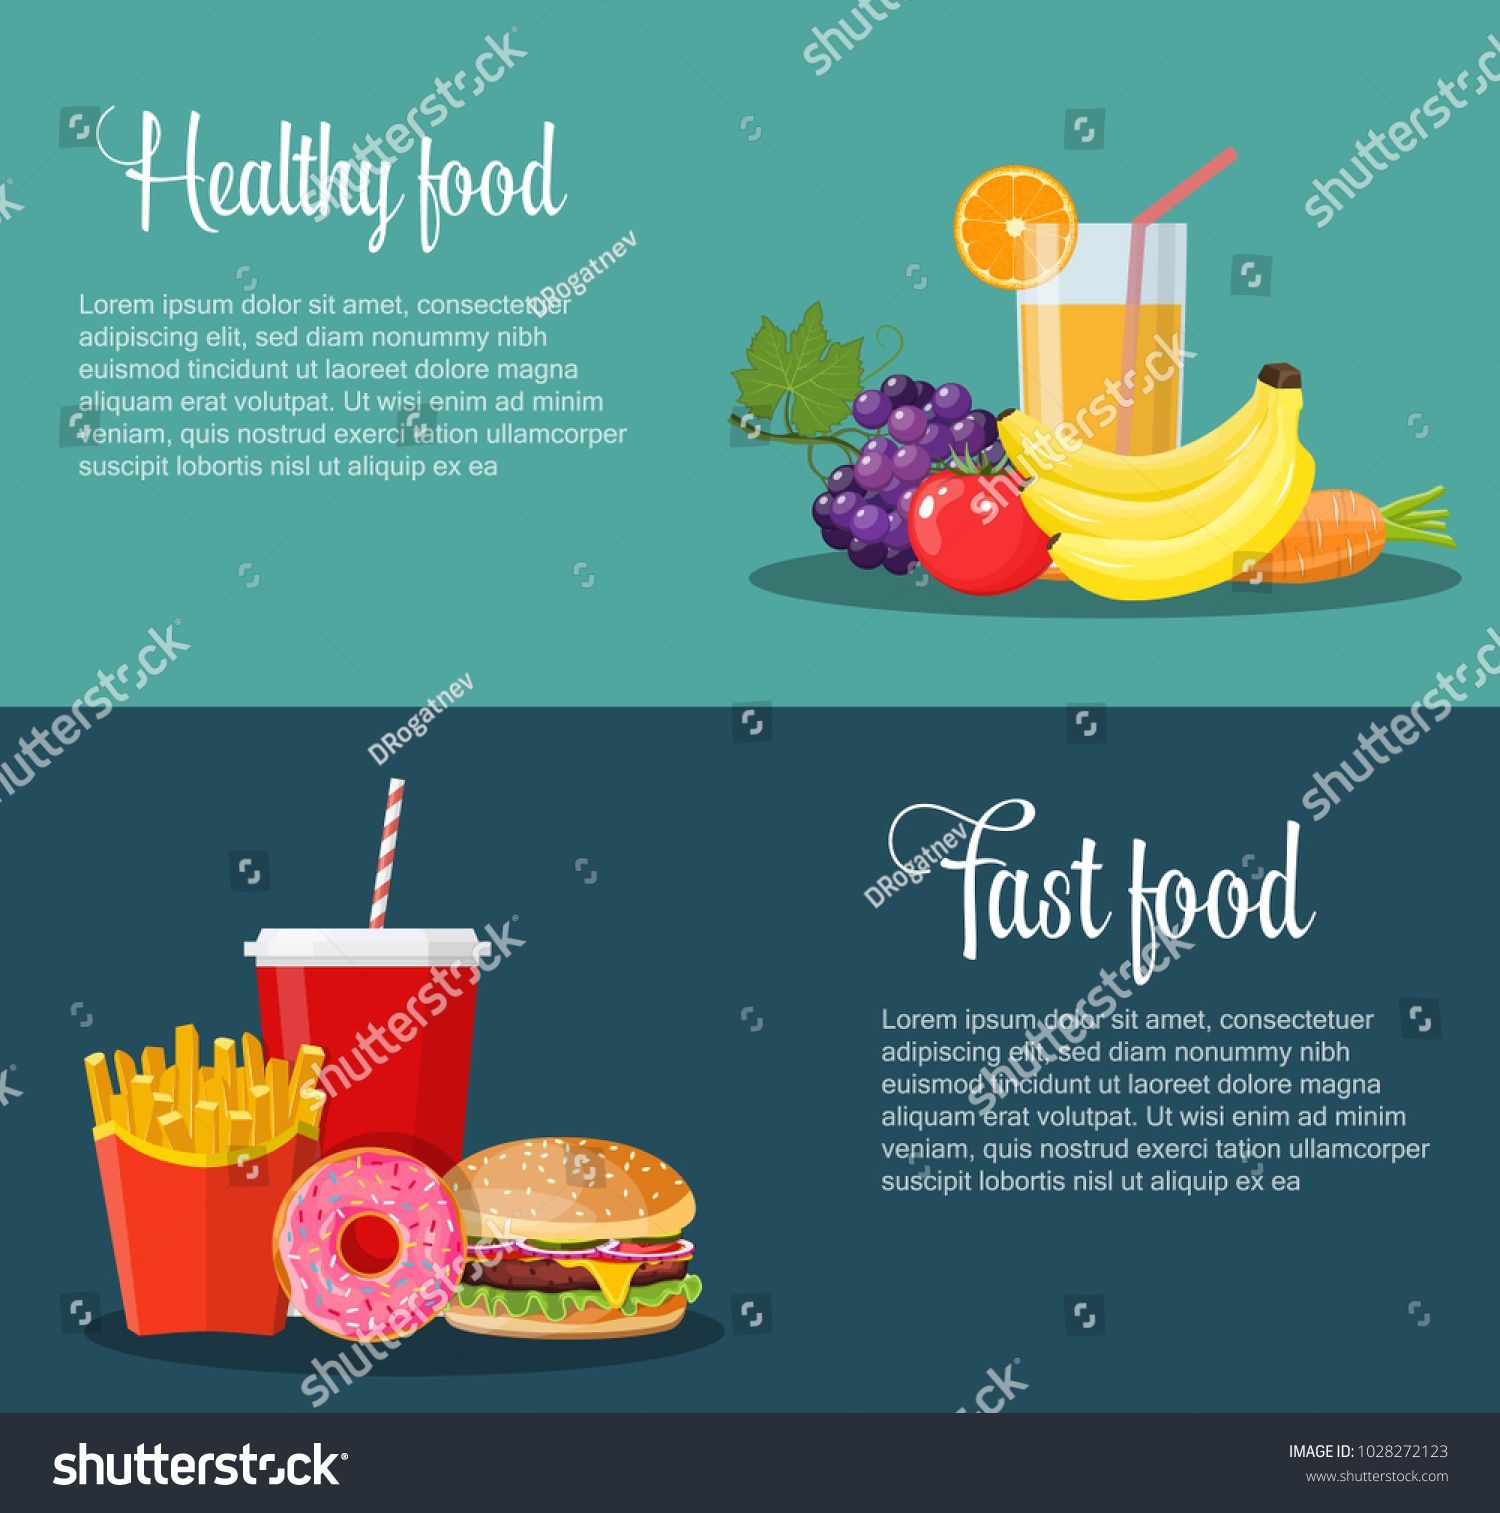 Healthy Unhealthy Food Banners Poster Items Stock Vector (Royalty Free) 1028272123 -   12 diet Illustration products ideas